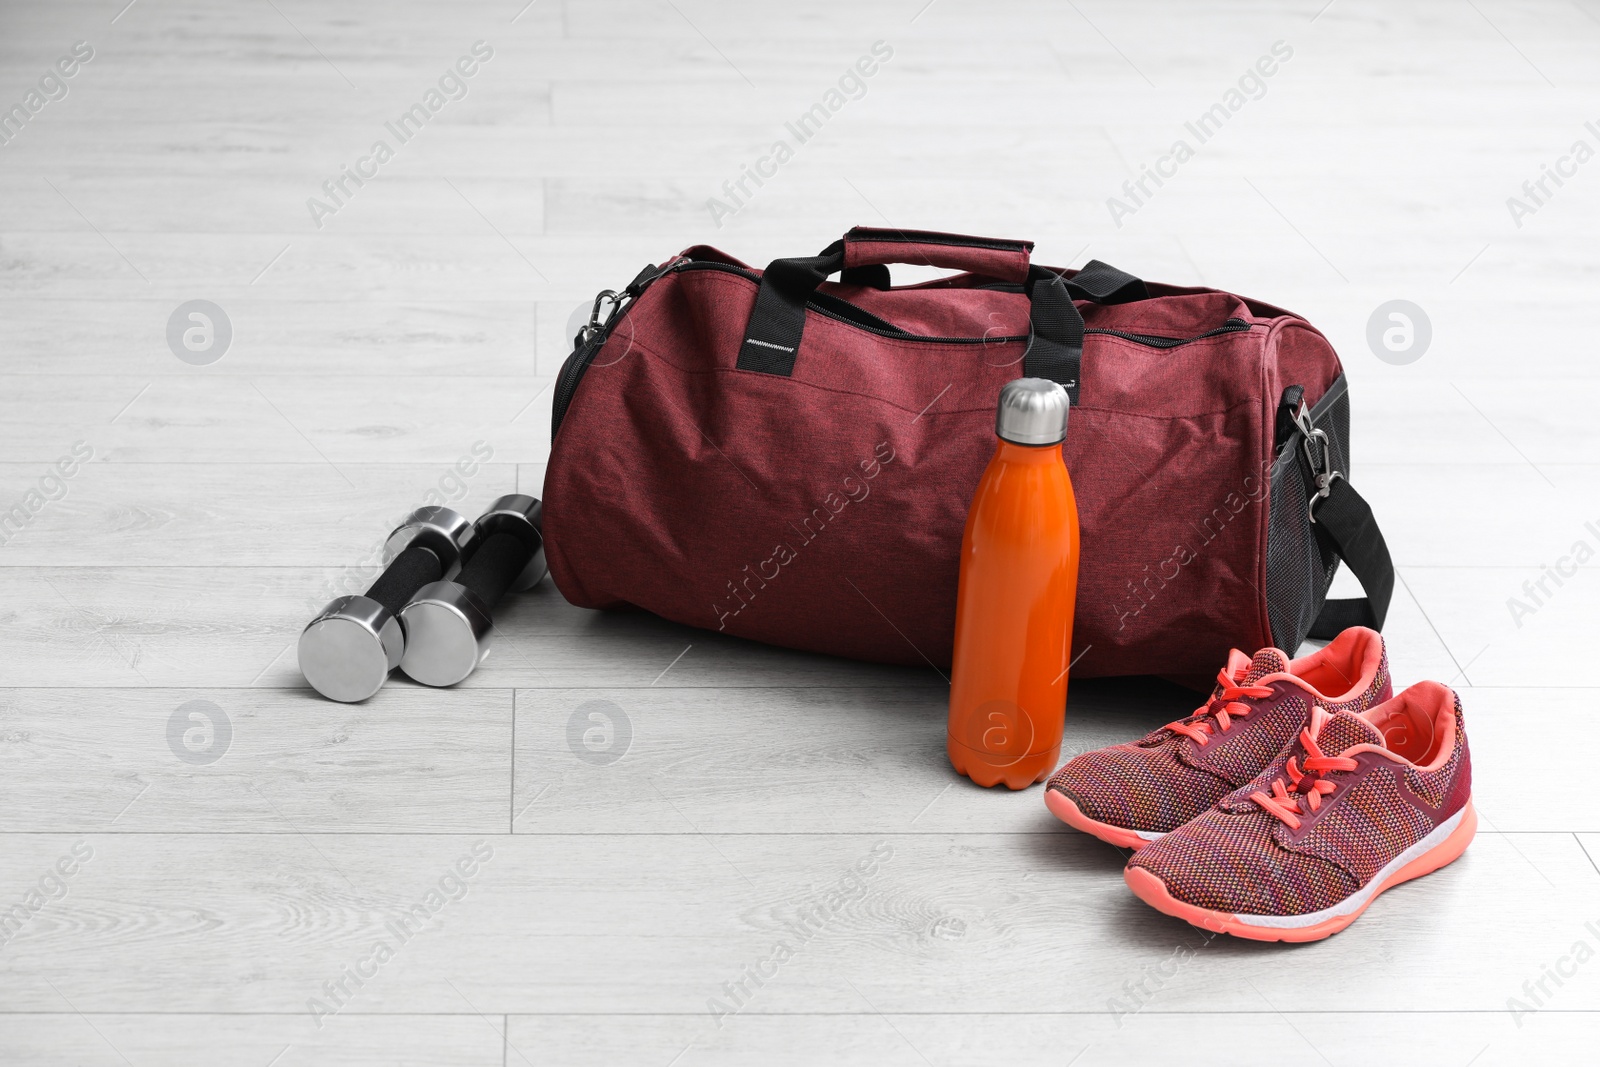 Photo of Sports bag and gym stuff on white floor